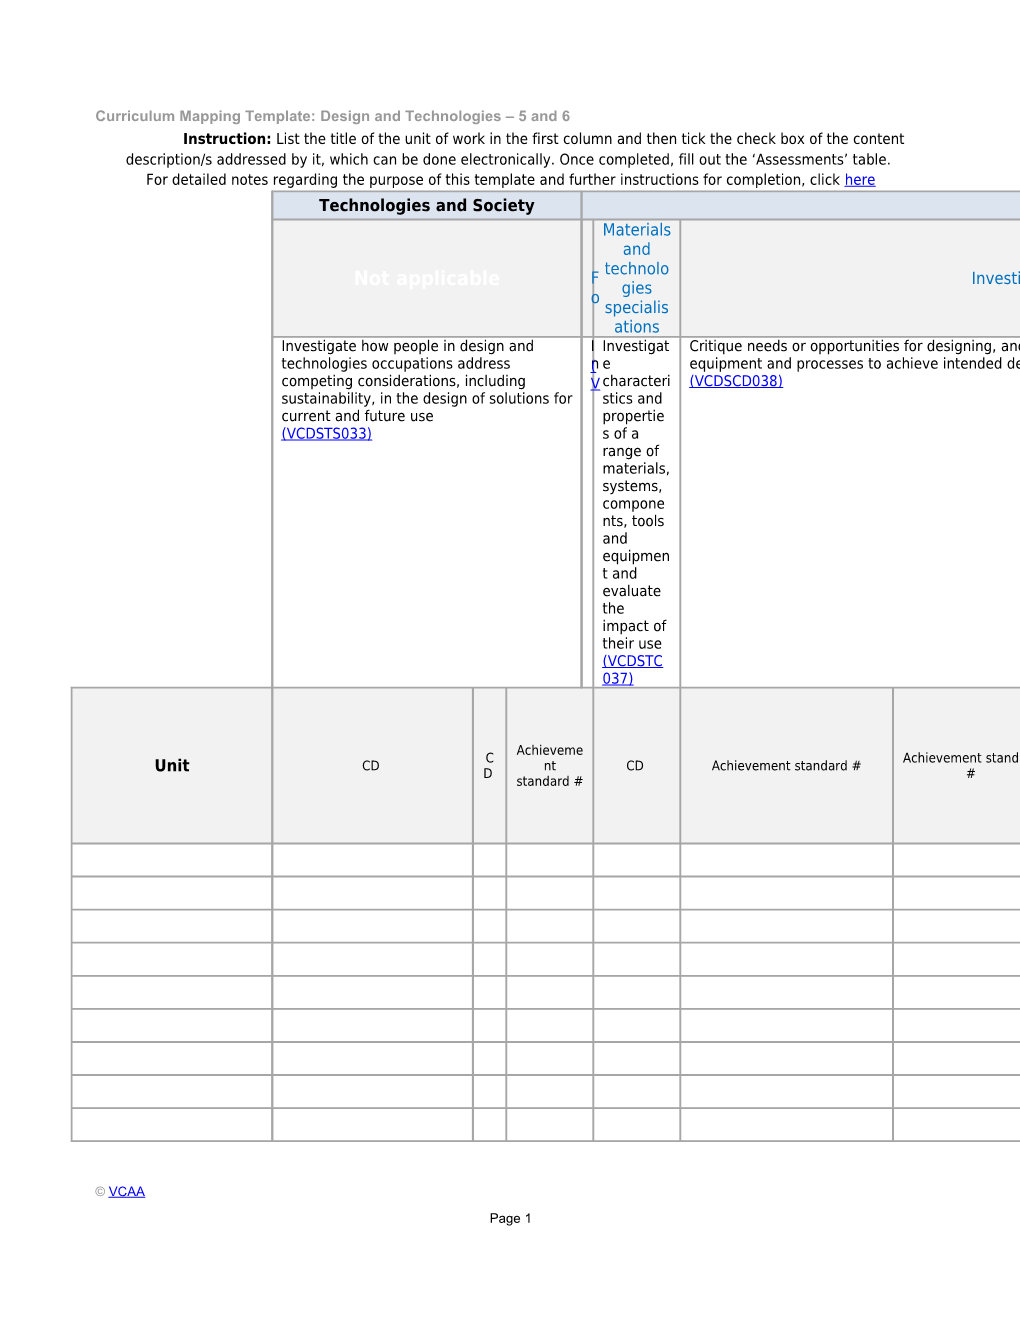 Curriculum Mapping Template: Design and Technologies 5 and 6